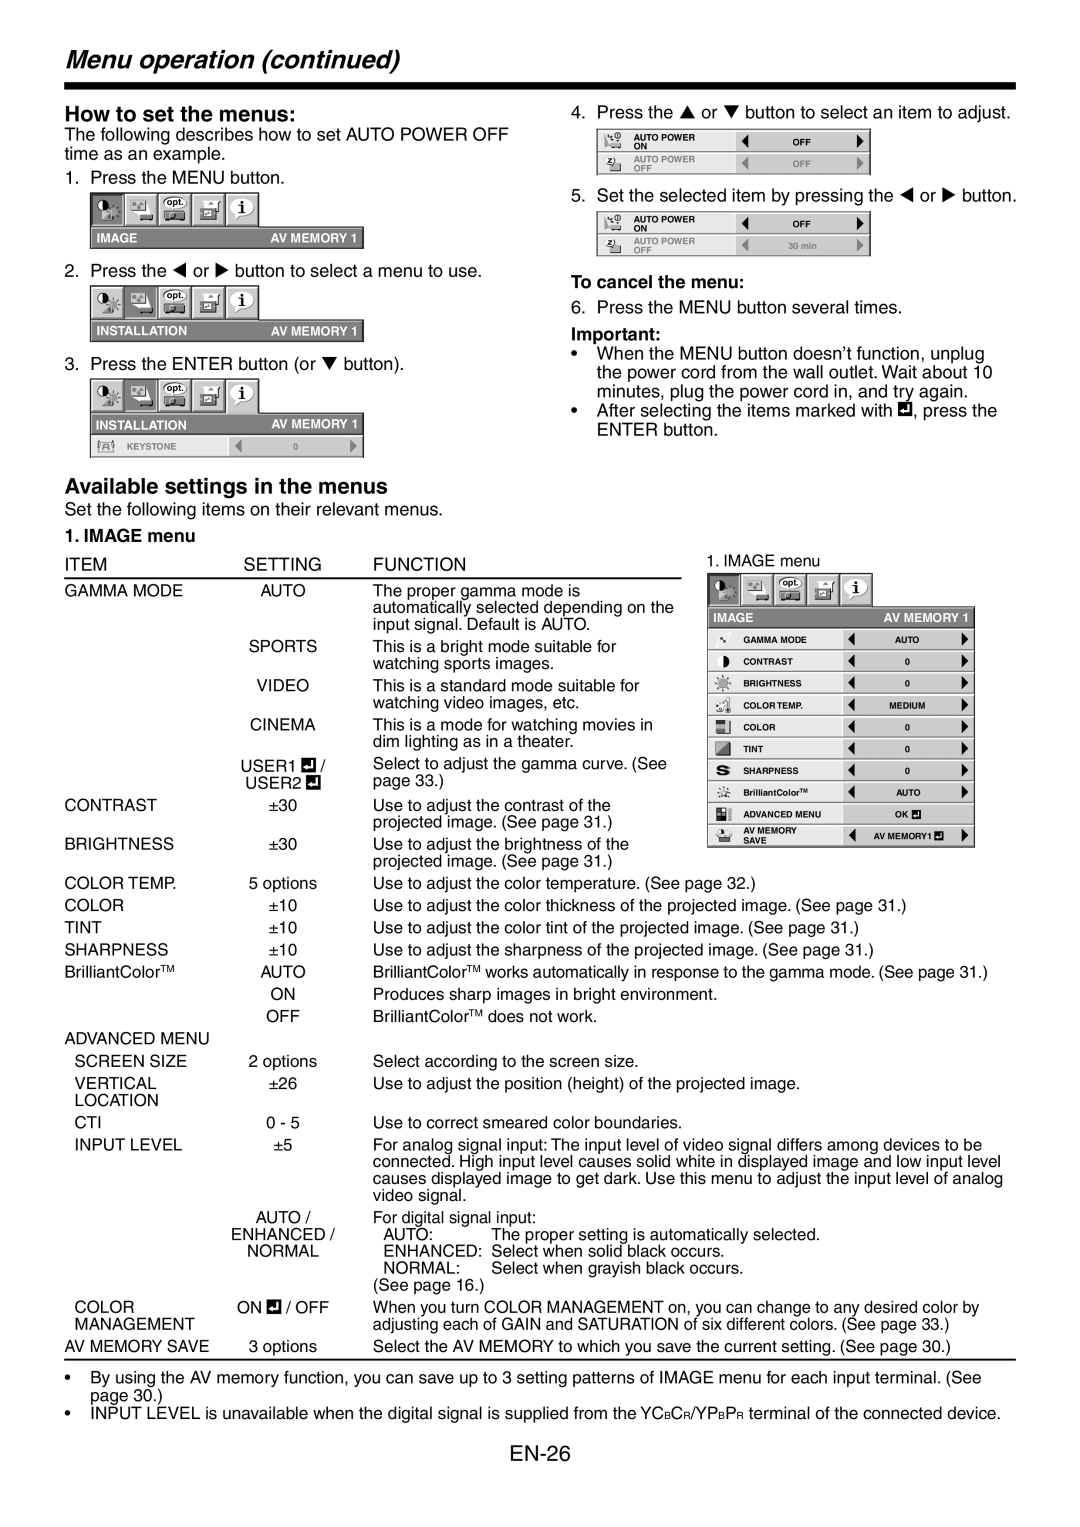 Mitsubishi Electronics HC3800 Menu operation continued, How to set the menus, Available settings in the menus, IMAGE menu 